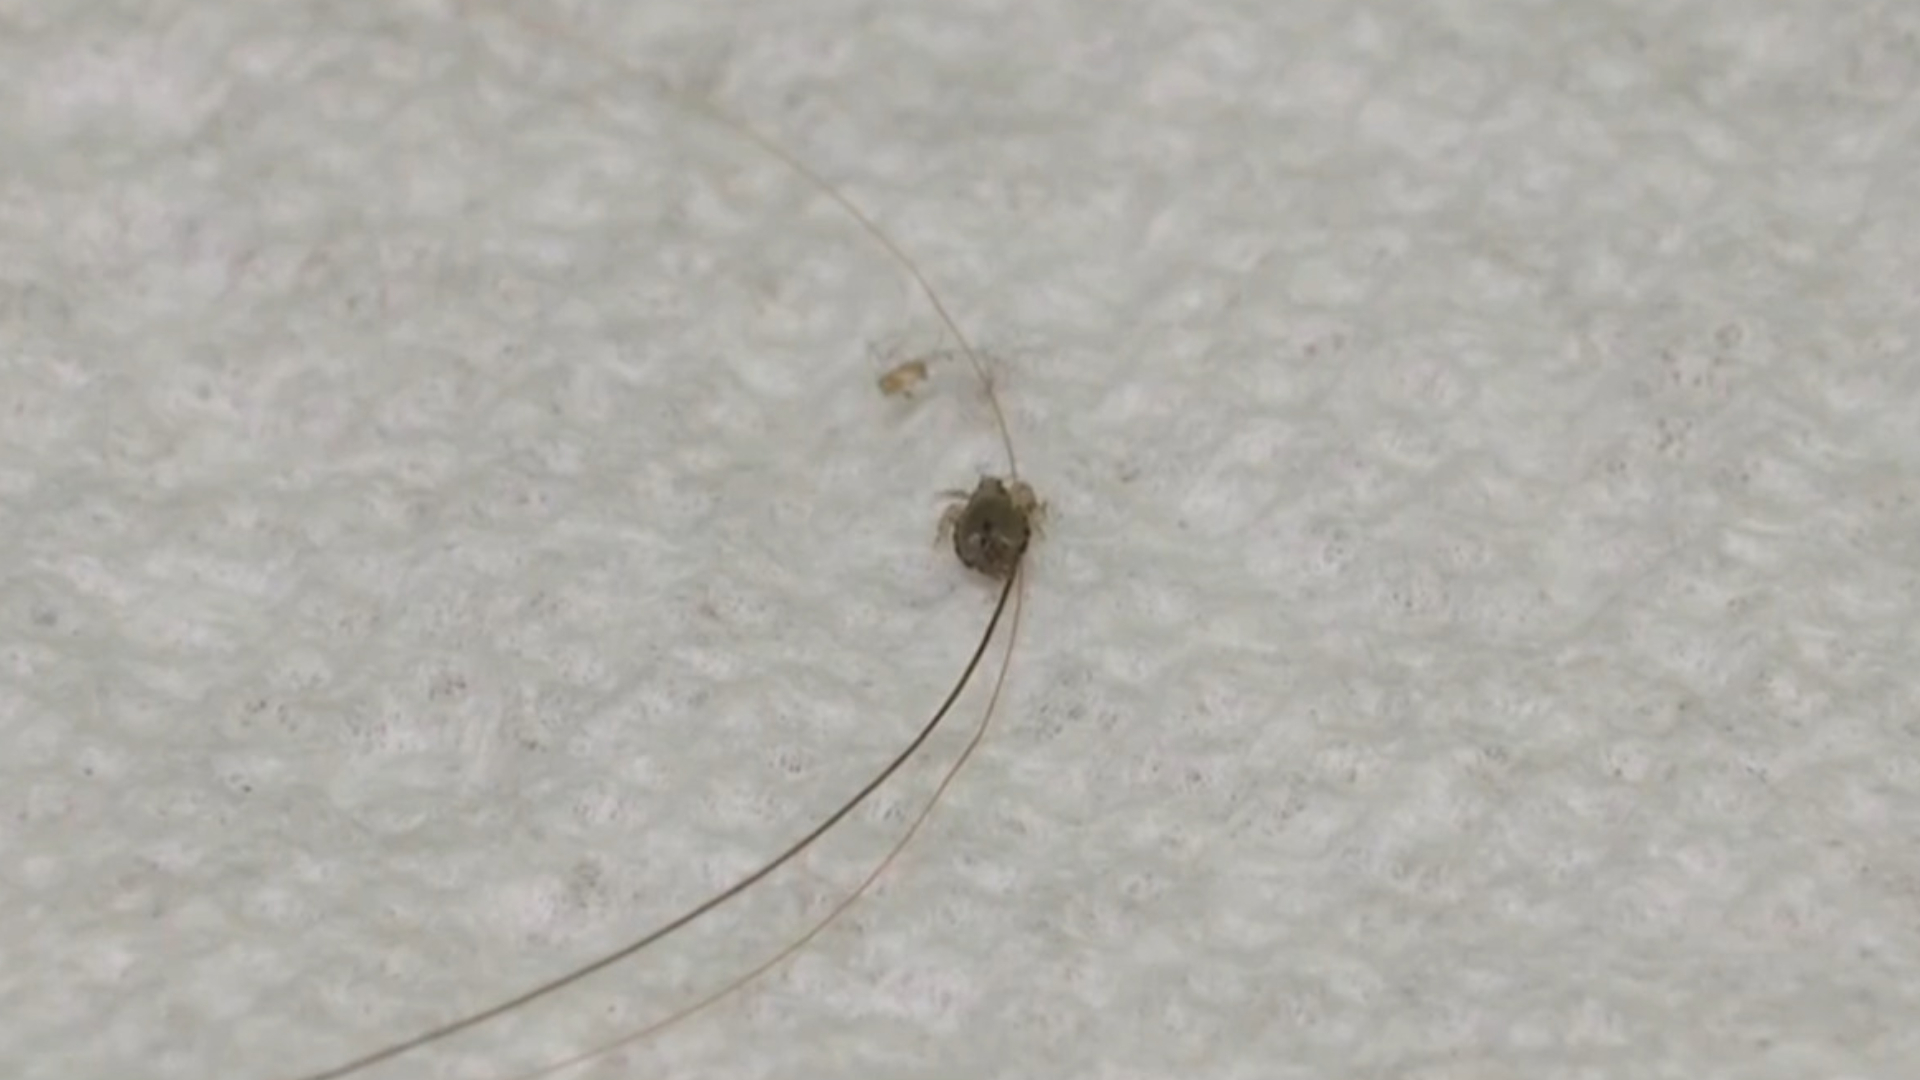 Experts warning about the rise of super lice